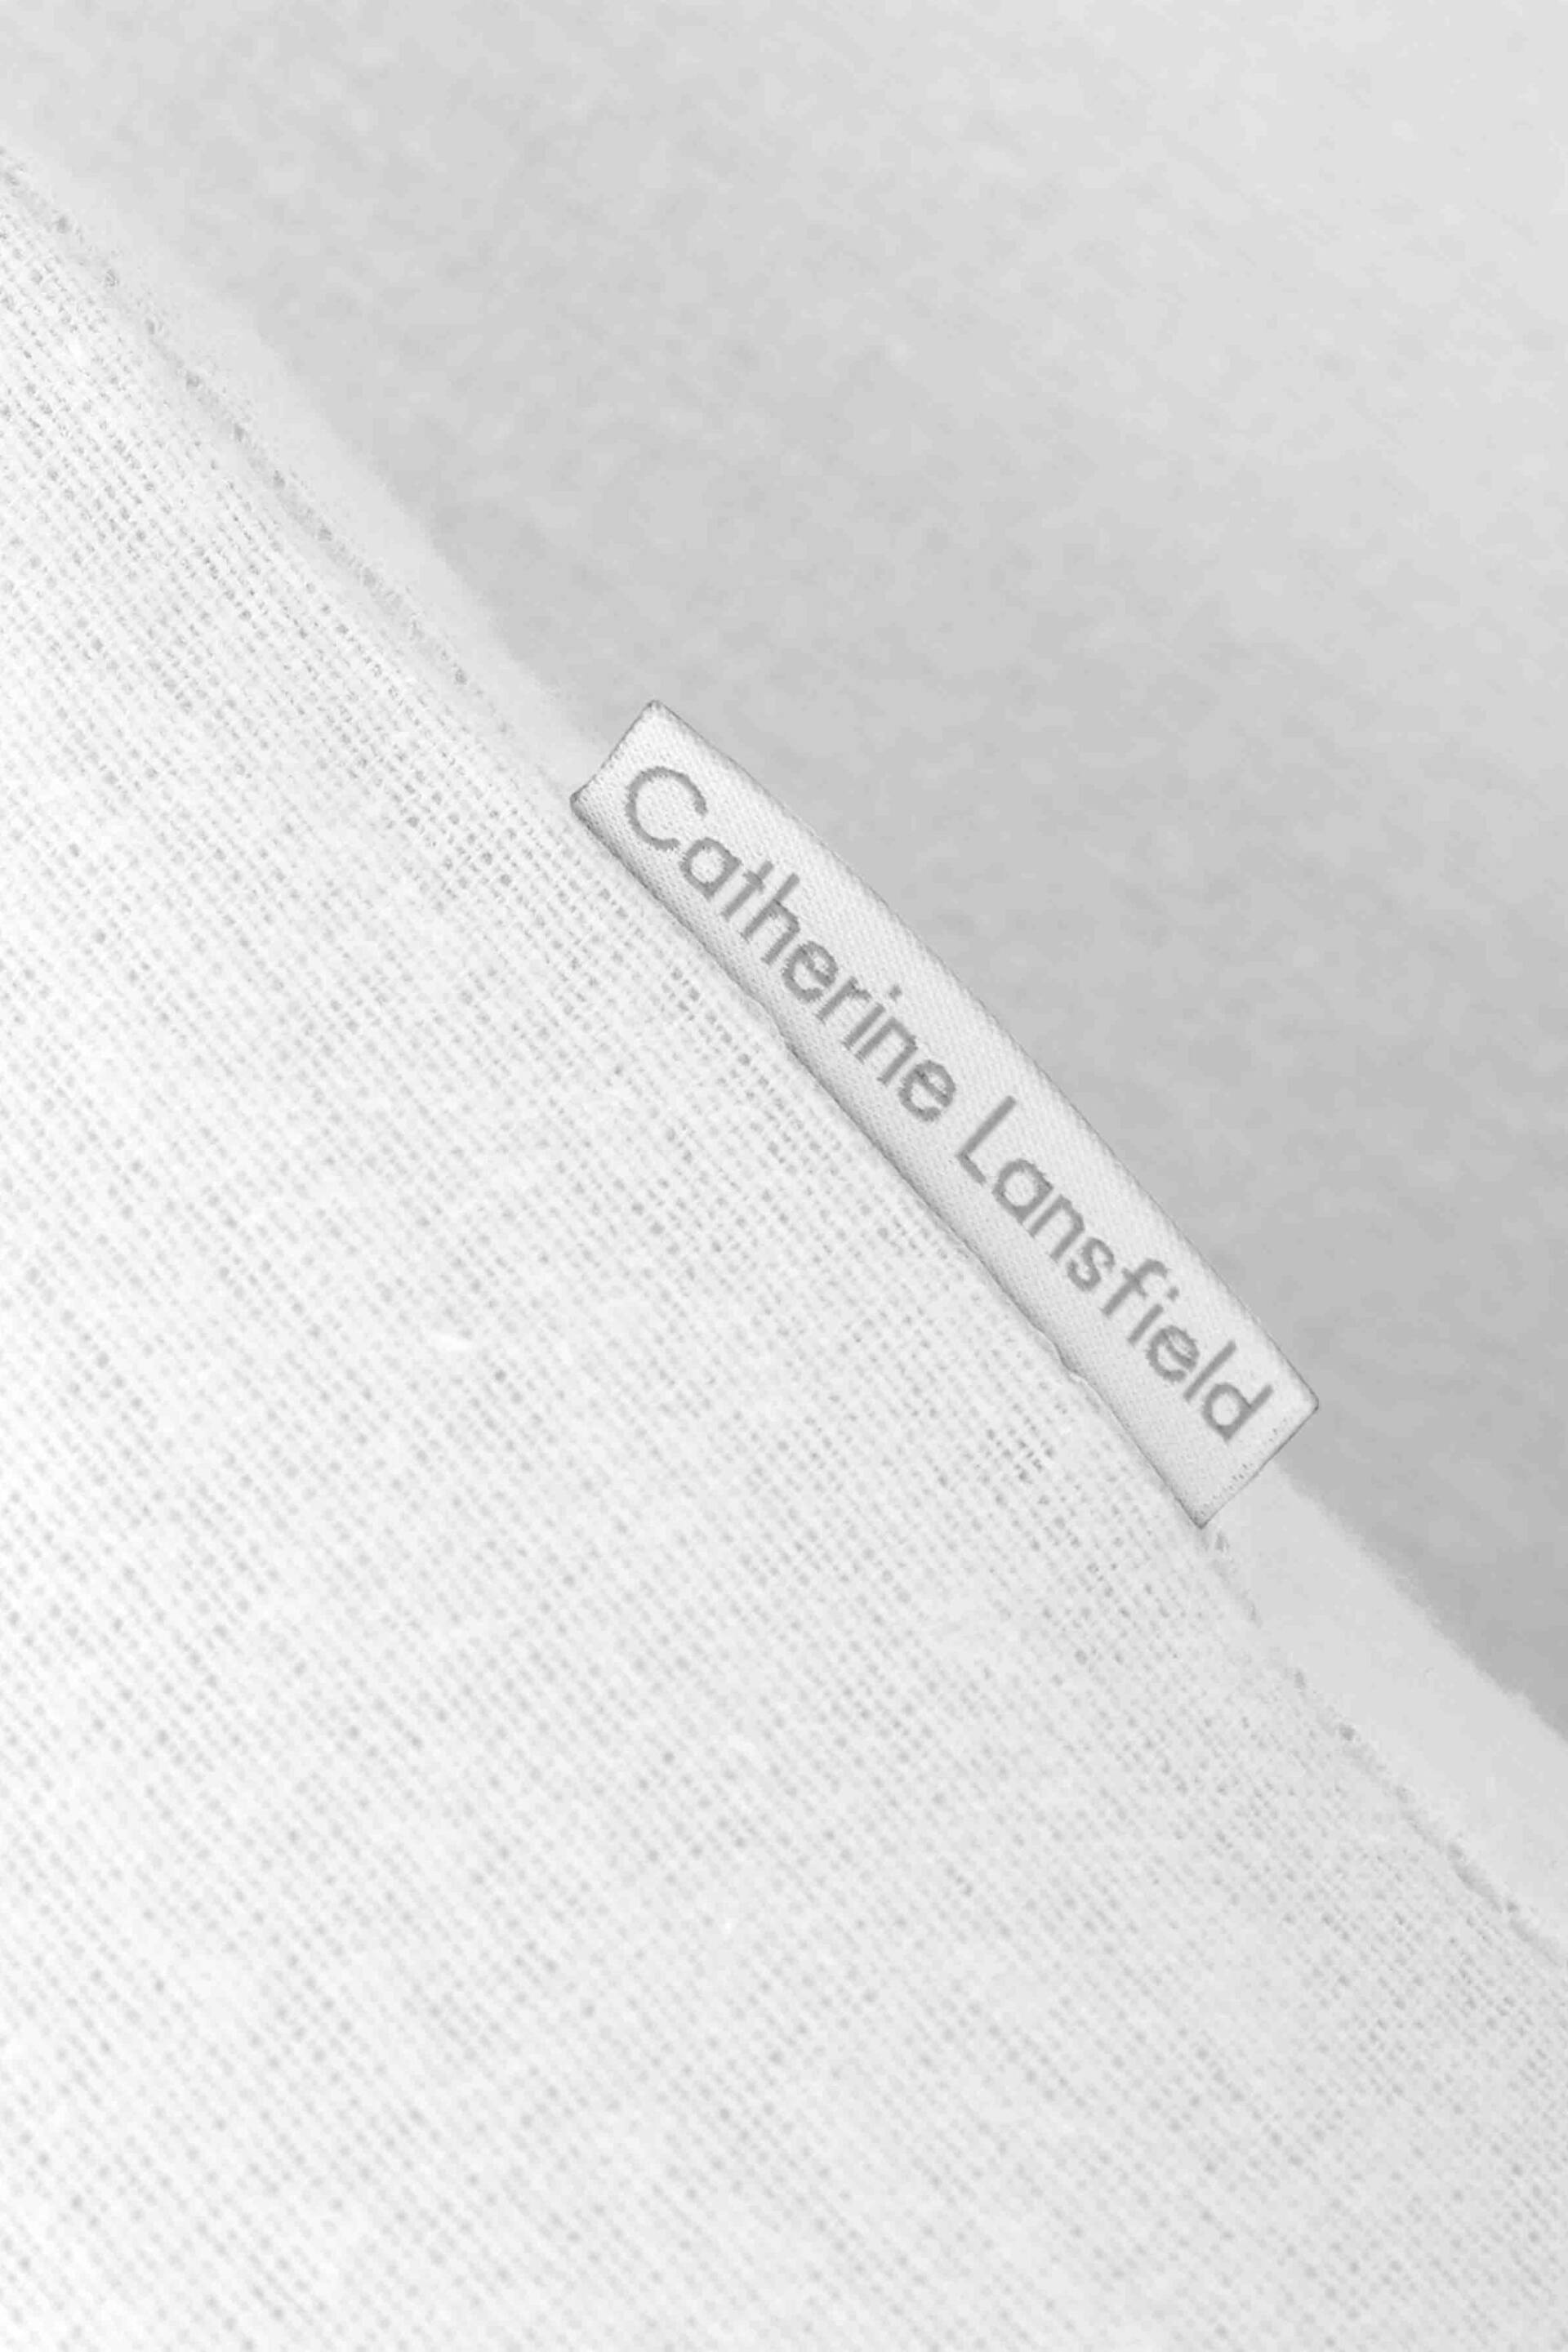 Catherine Lansfield White Brushed 100% Cotton Duvet Cover Set - Image 3 of 3